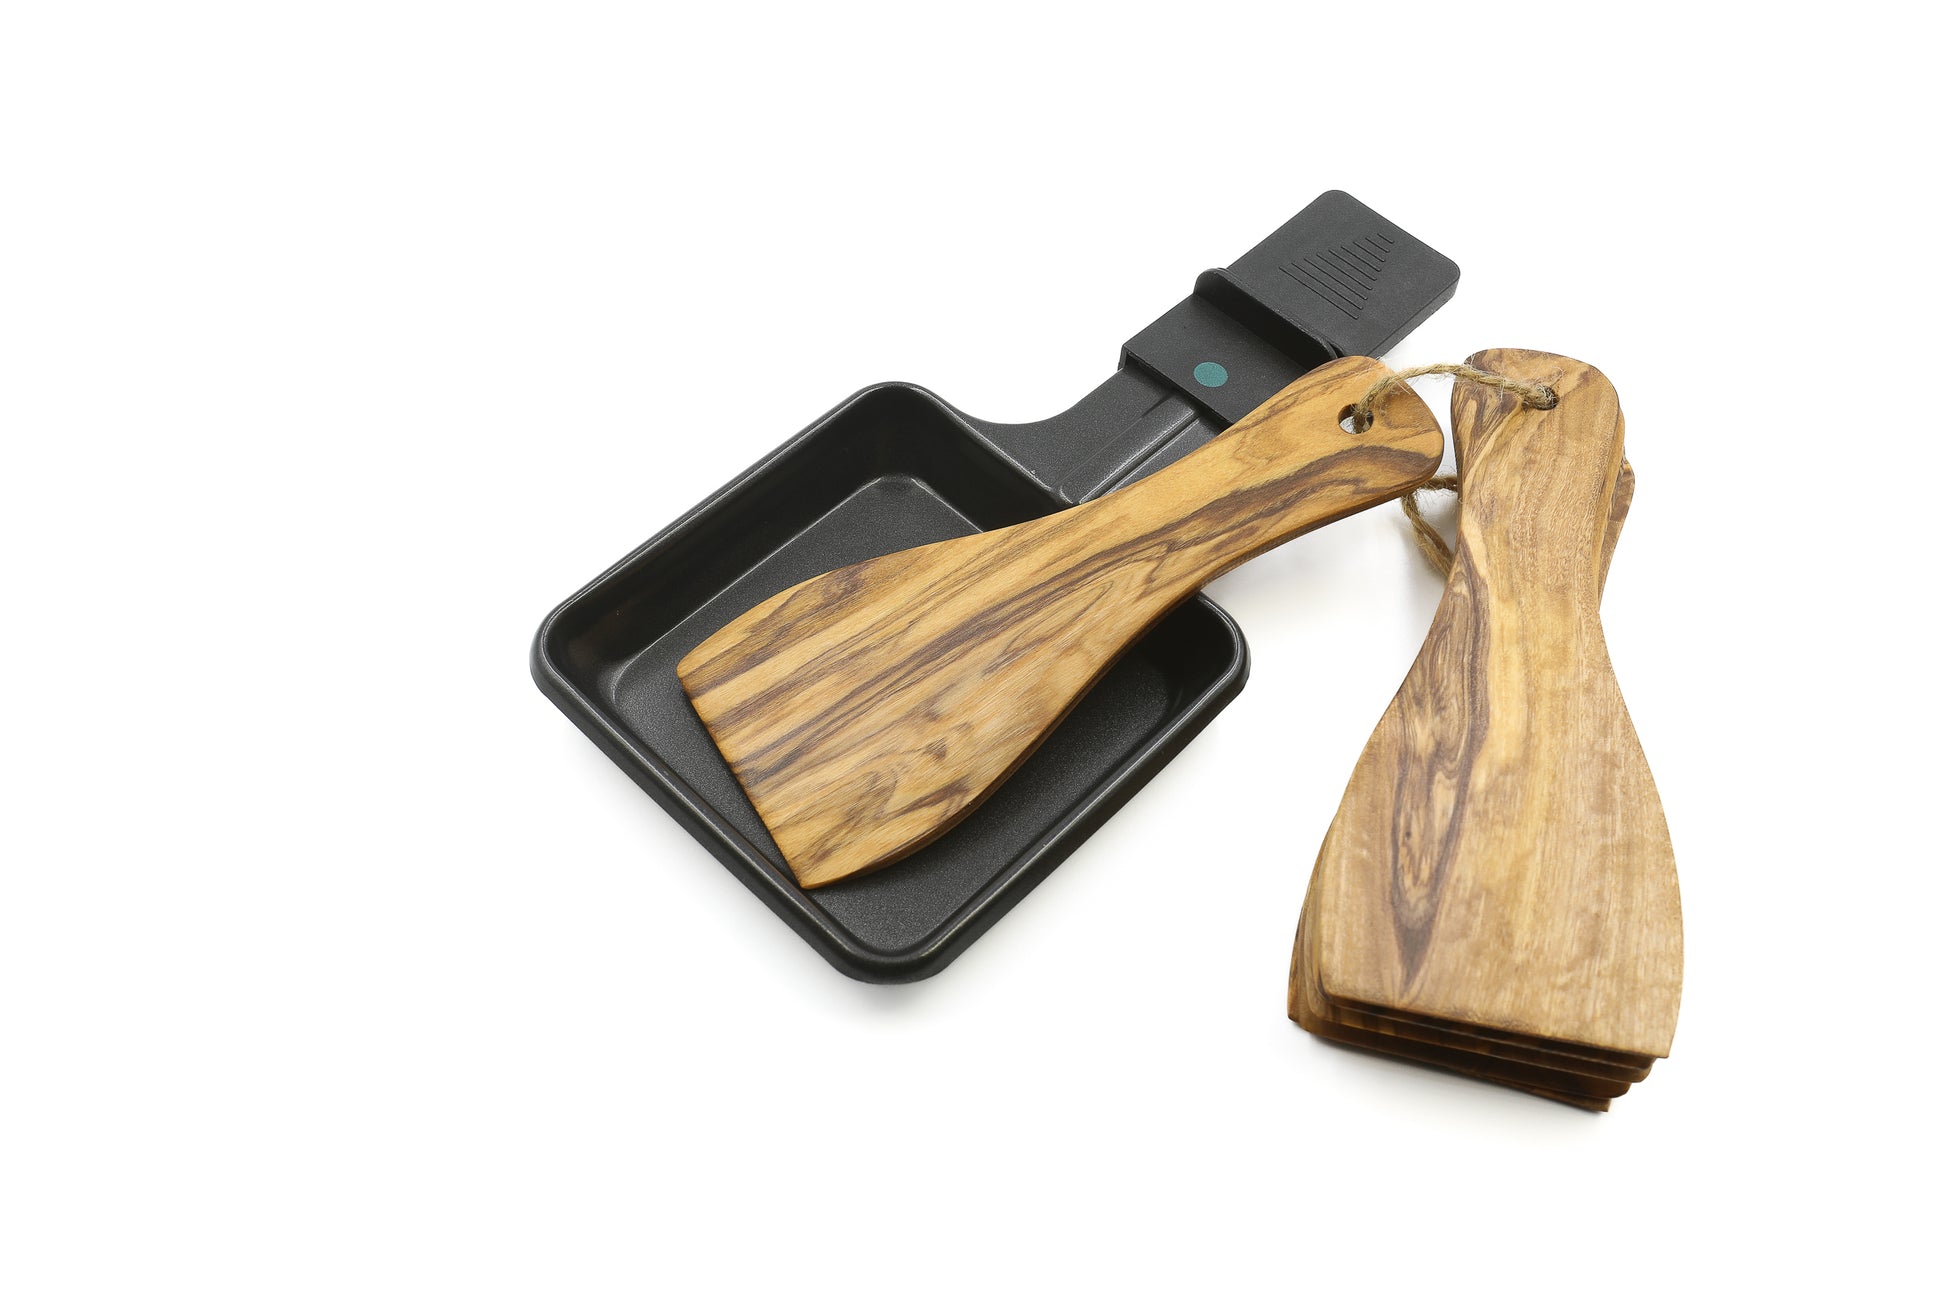 Olive wood spatula ensemble for raclette enthusiasts, set of 6